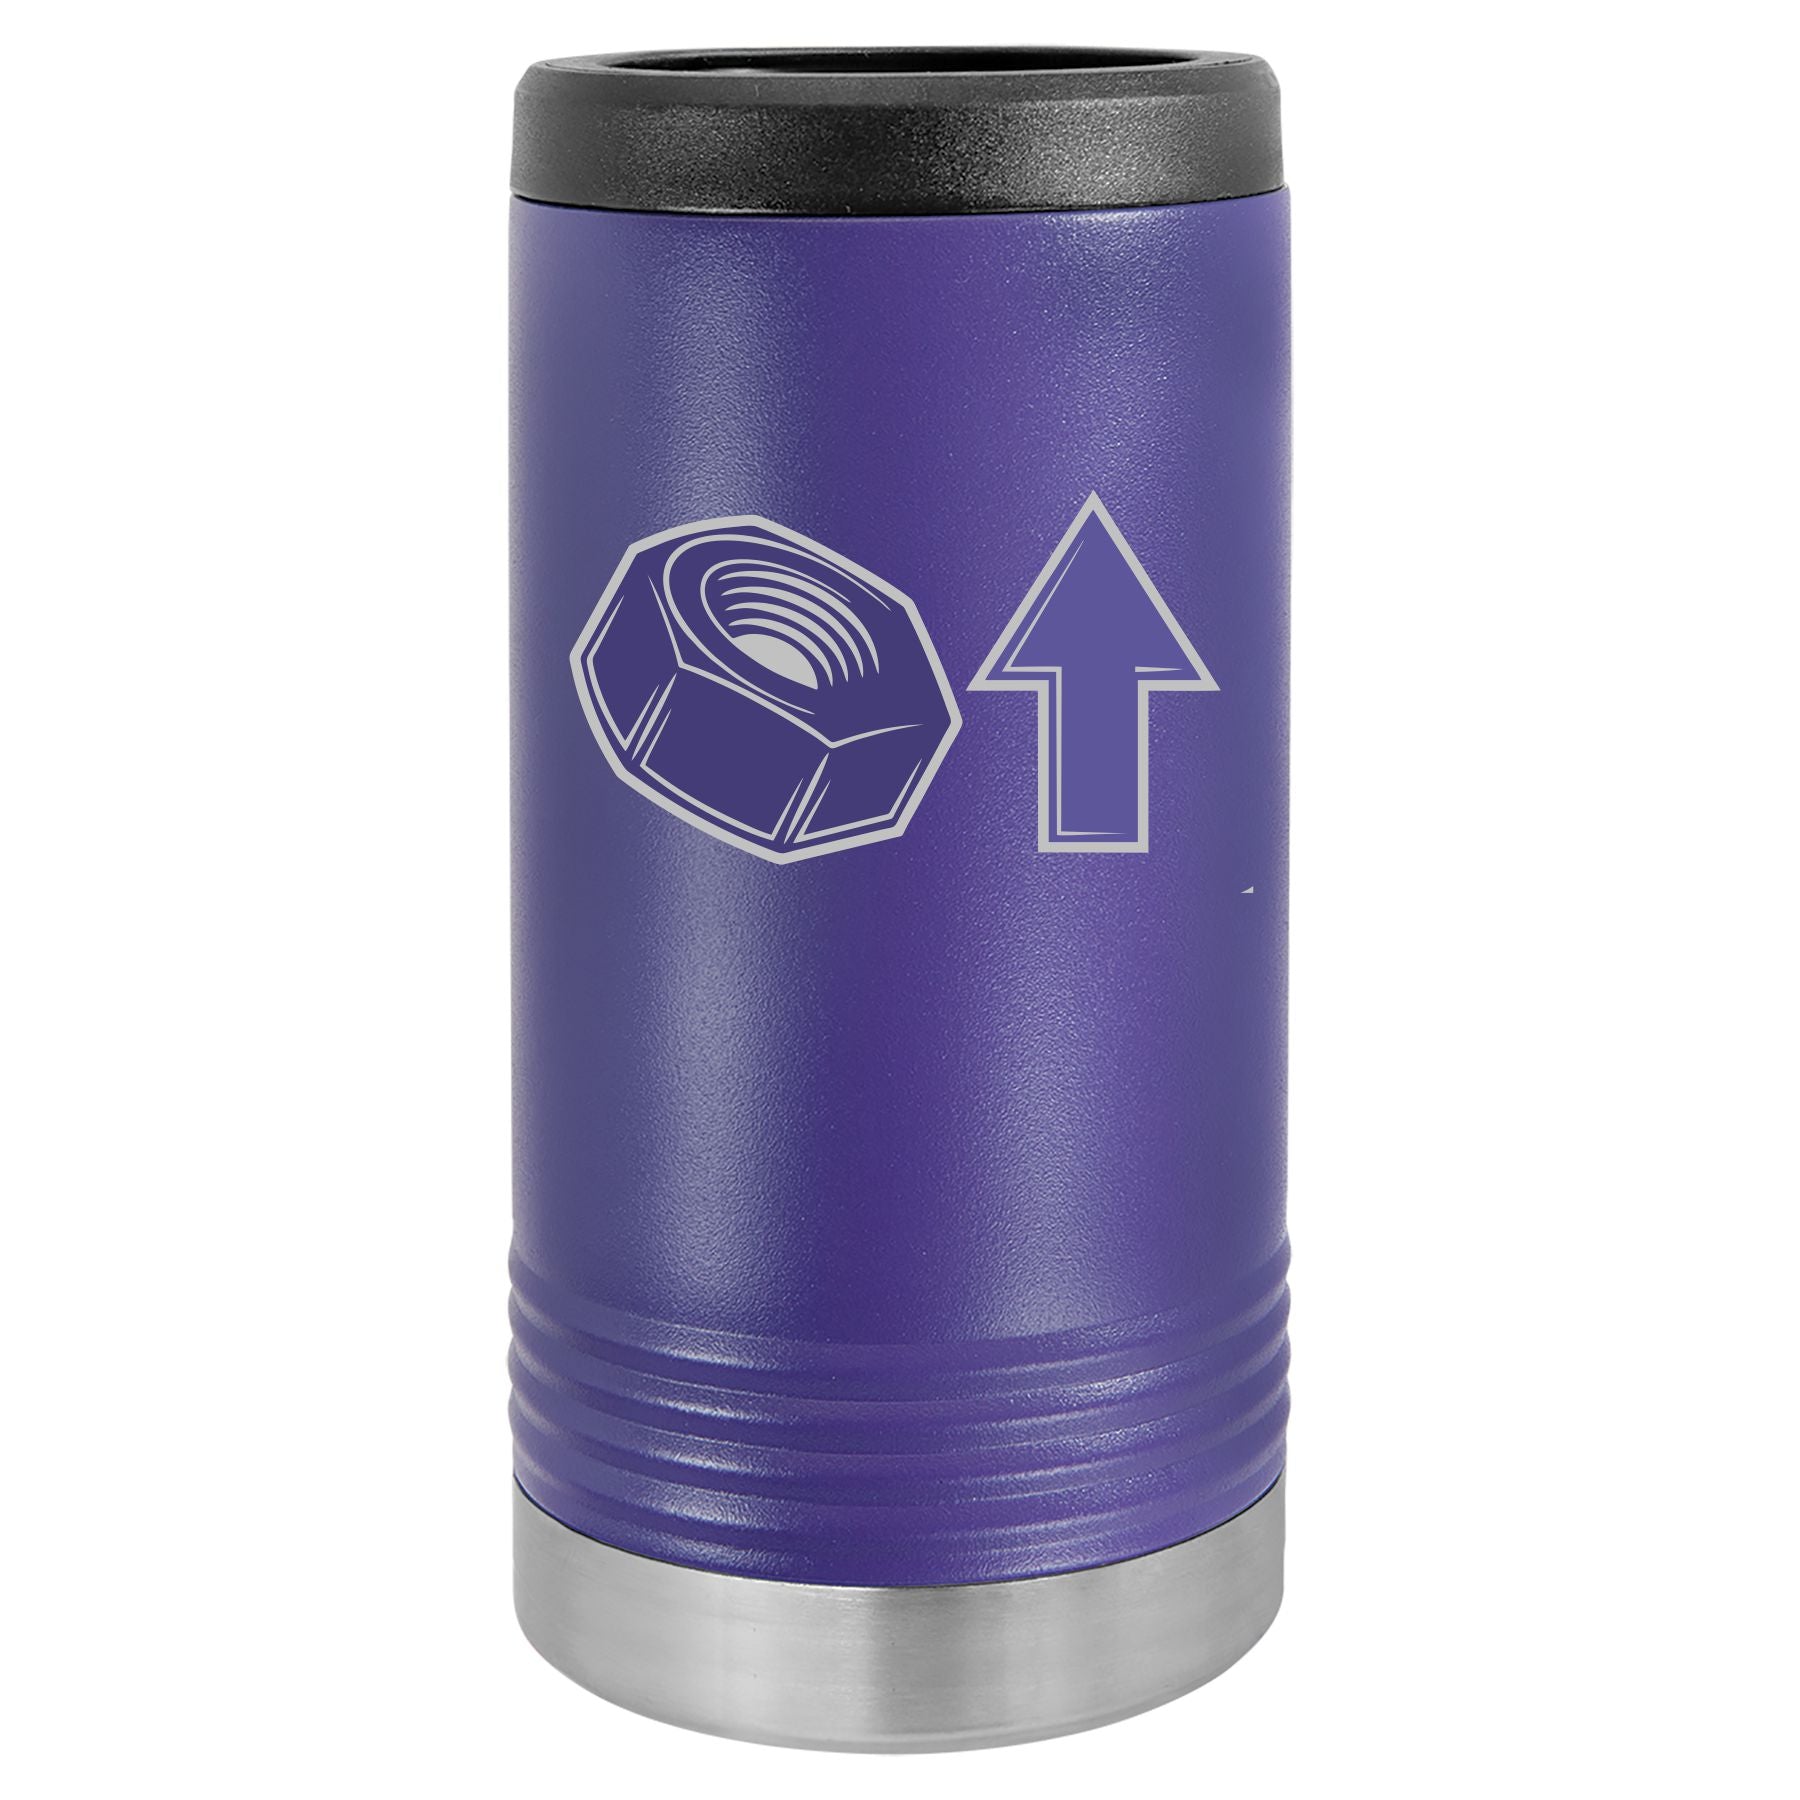 Koozie-stainless steel vacuum insulated beer can cooler